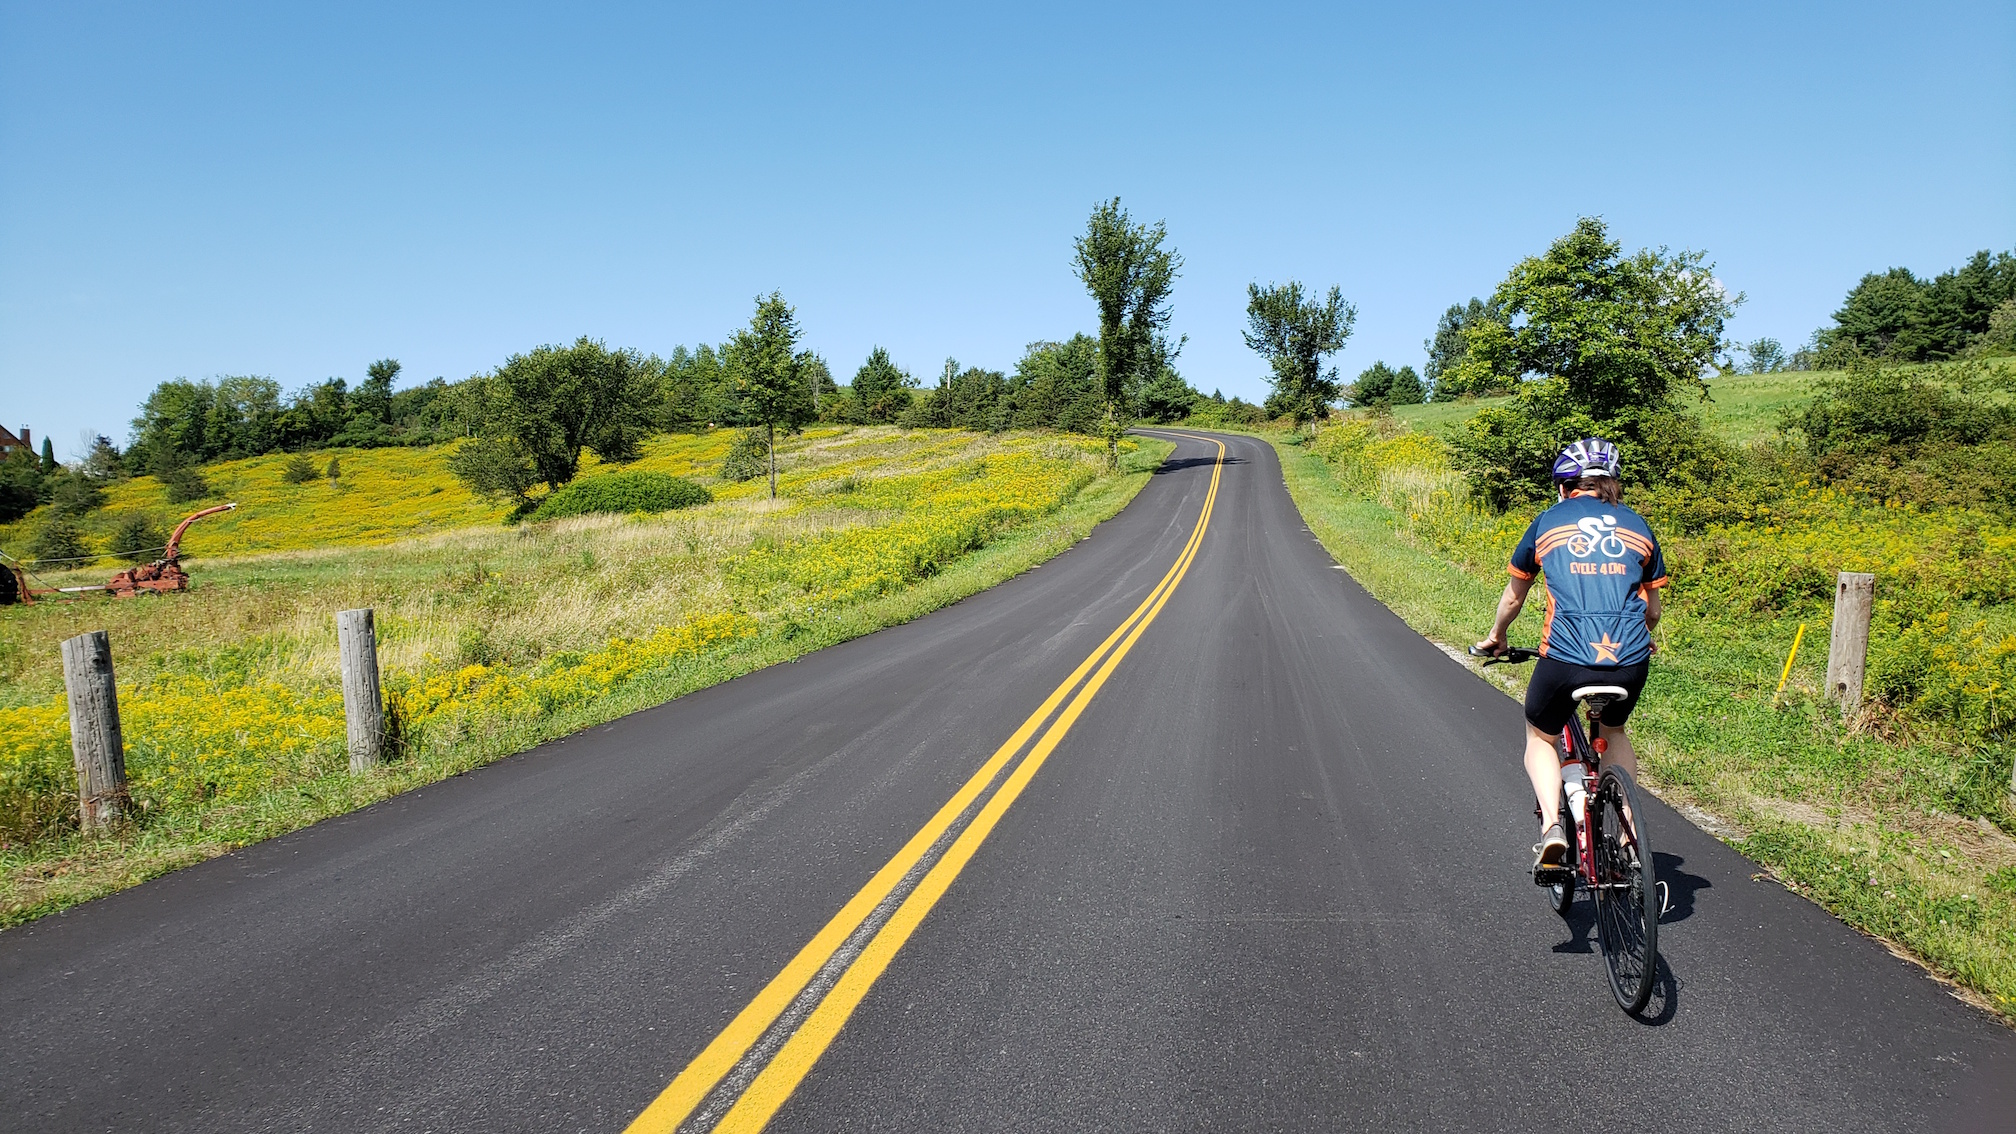 Mary Cate, a woman wearing a helmet and a blue shirt that says “Cycle 4 CMT”, rides her bicycle down a long straight road which cuts through a beautiful lush landscape of grass and sparse trees.